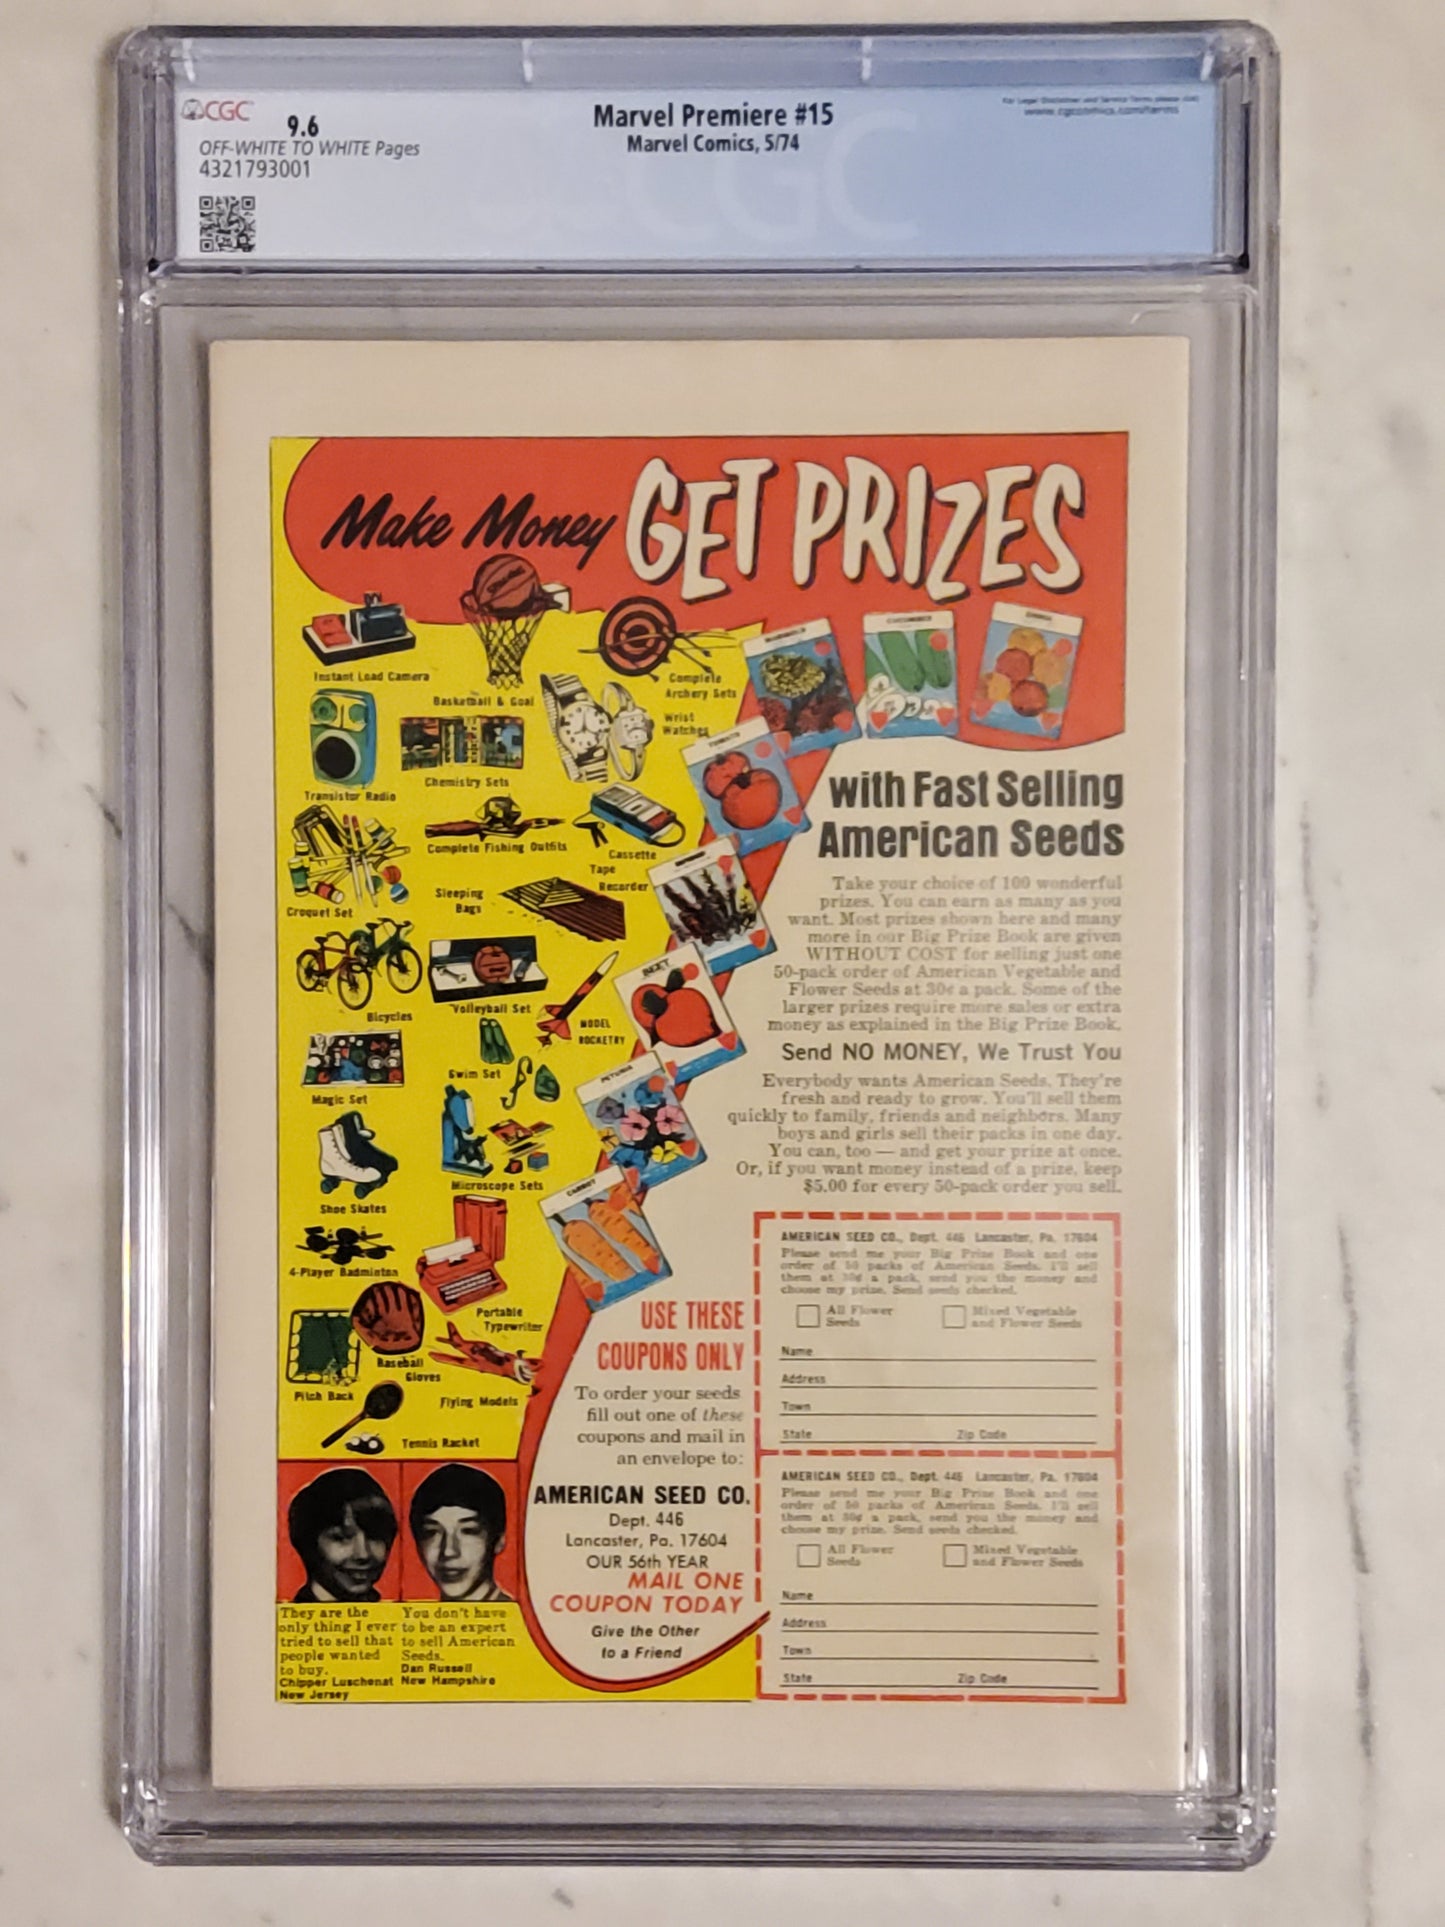 Marvel Premiere #15 | CGC 9.6  | Bronze Age | 1st Appearance Of Iron Fist (Danny Rand)